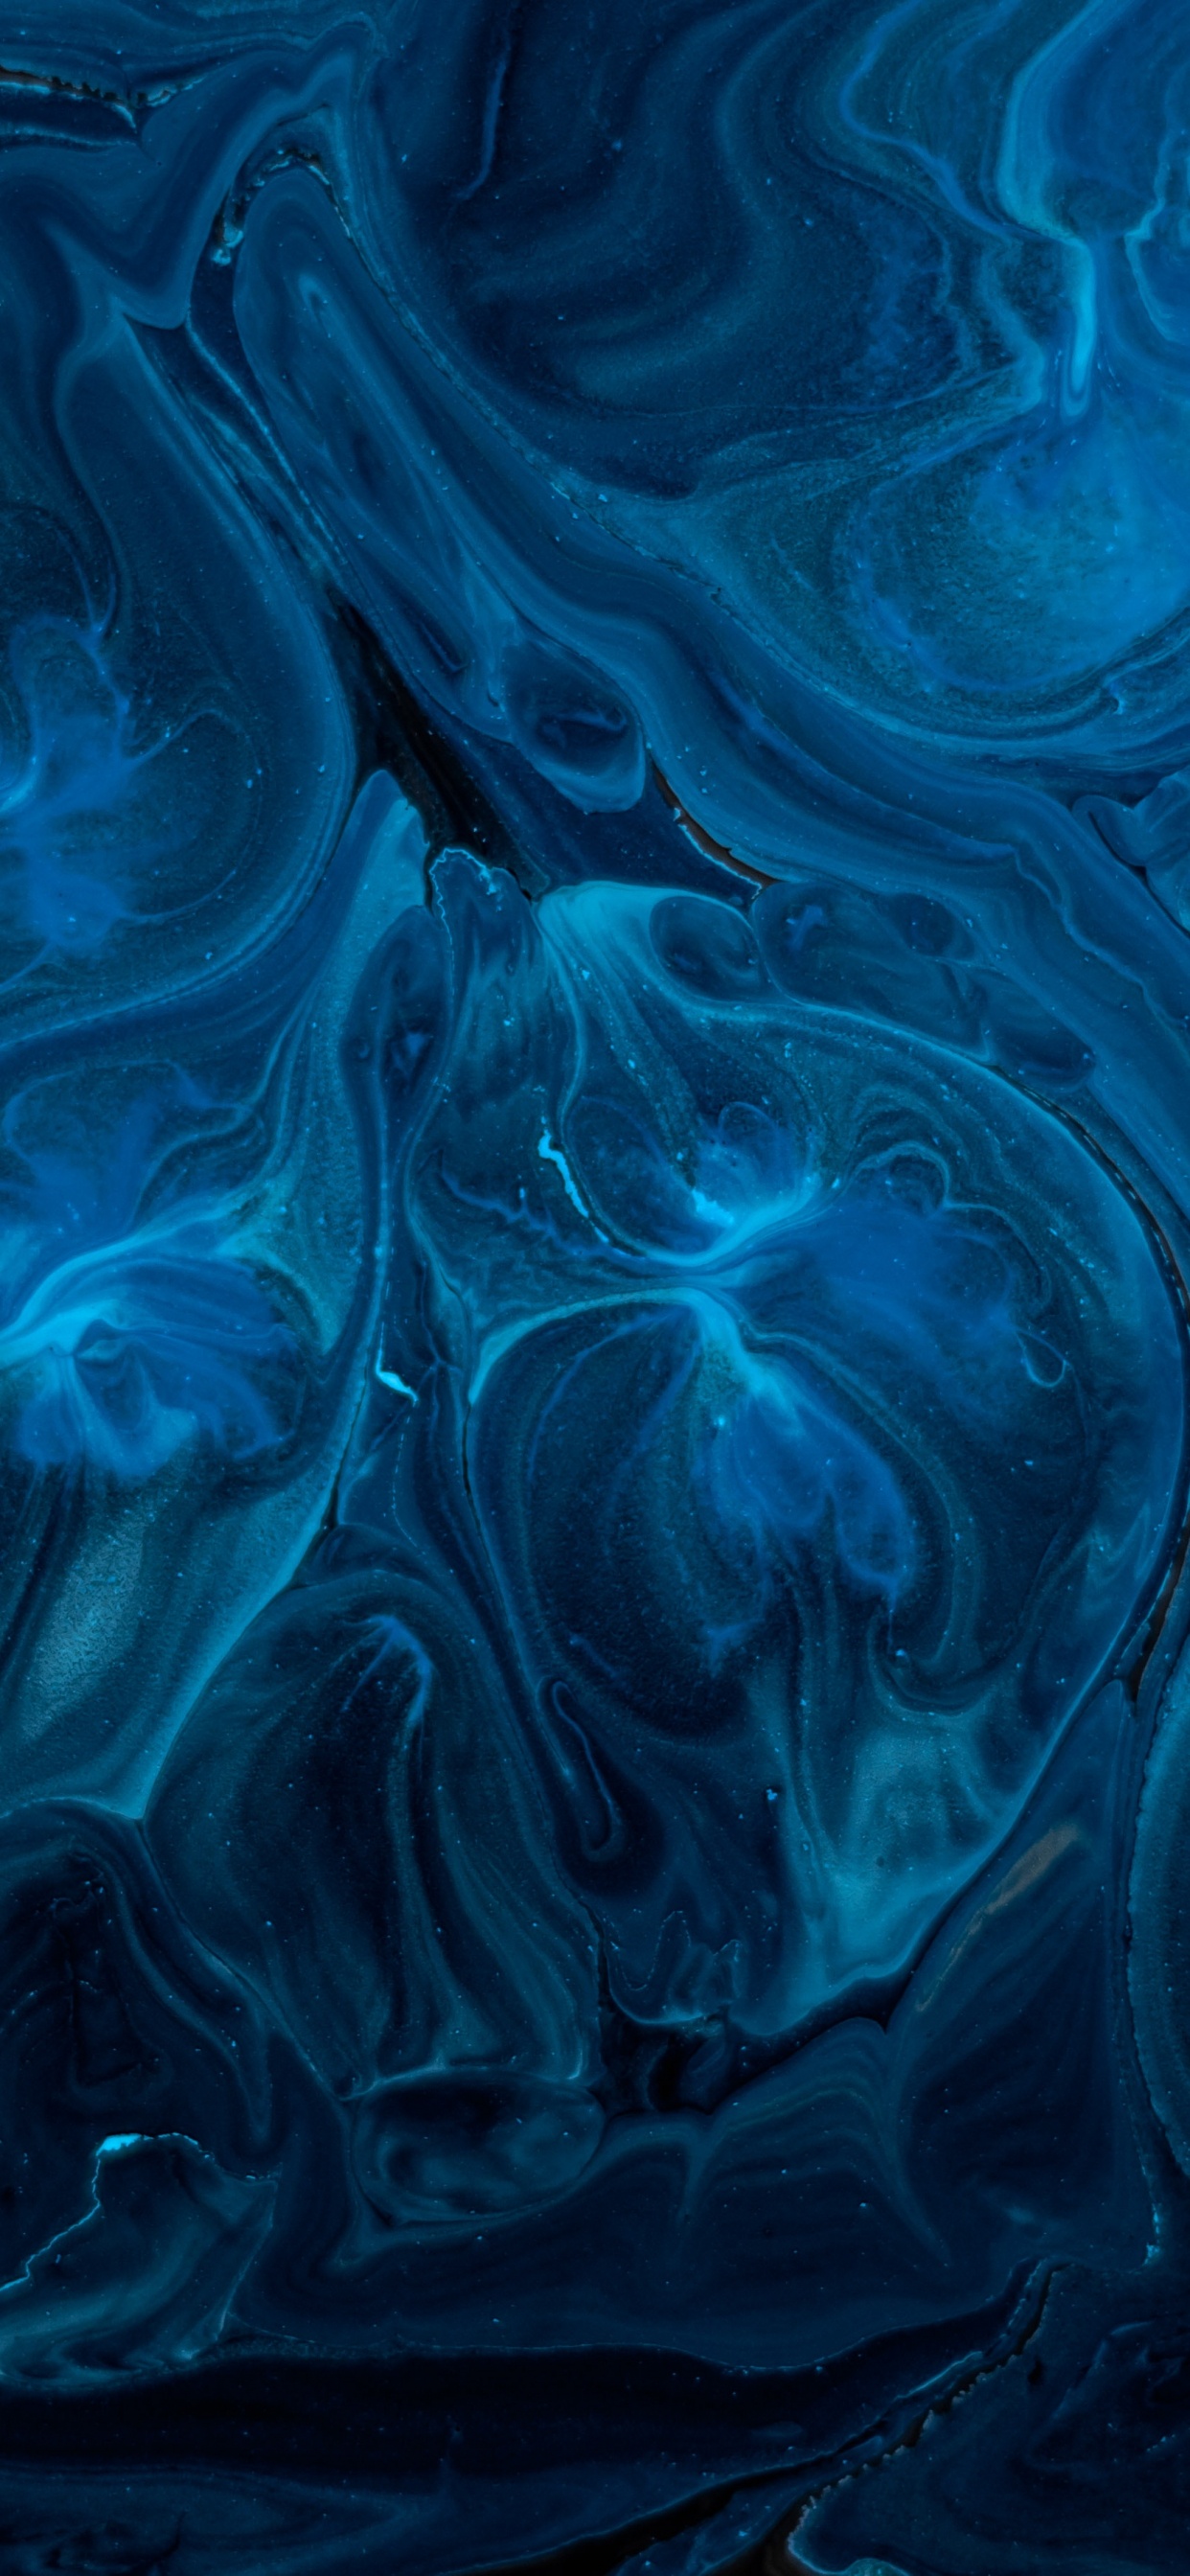 Blue and Black Abstract Painting. Wallpaper in 1242x2688 Resolution